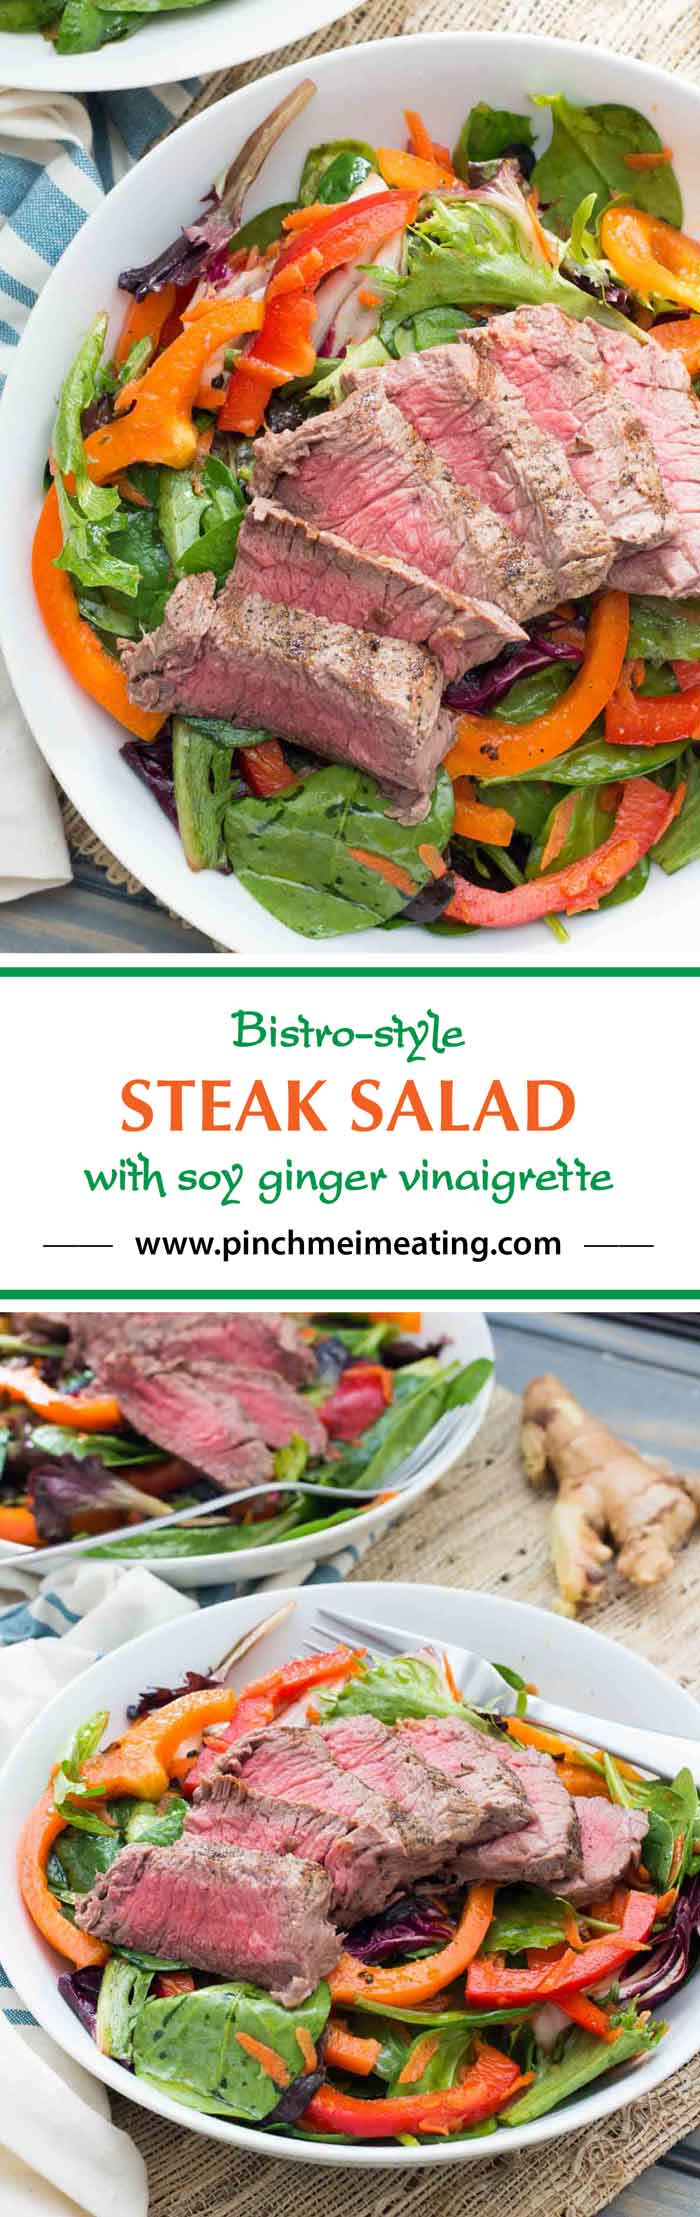 This mixed greens salad with bell peppers and a soy ginger vinaigrette is topped with a rare steak for a light and refreshing spring or summer lunch!